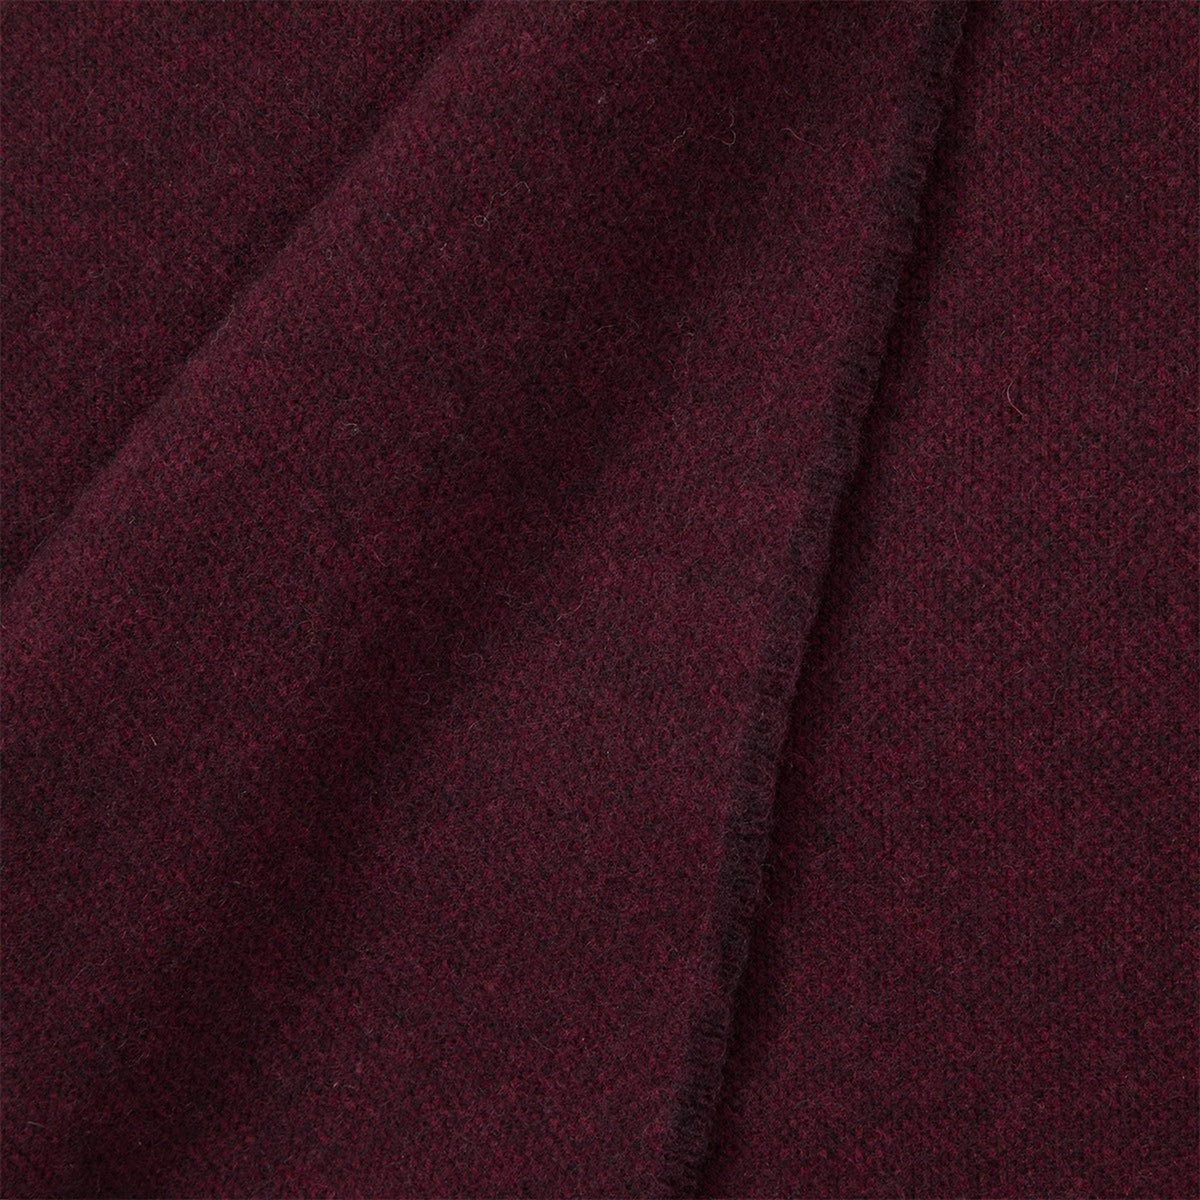 Swatch Sample of Yves Delorme Club Throw in Color Prune